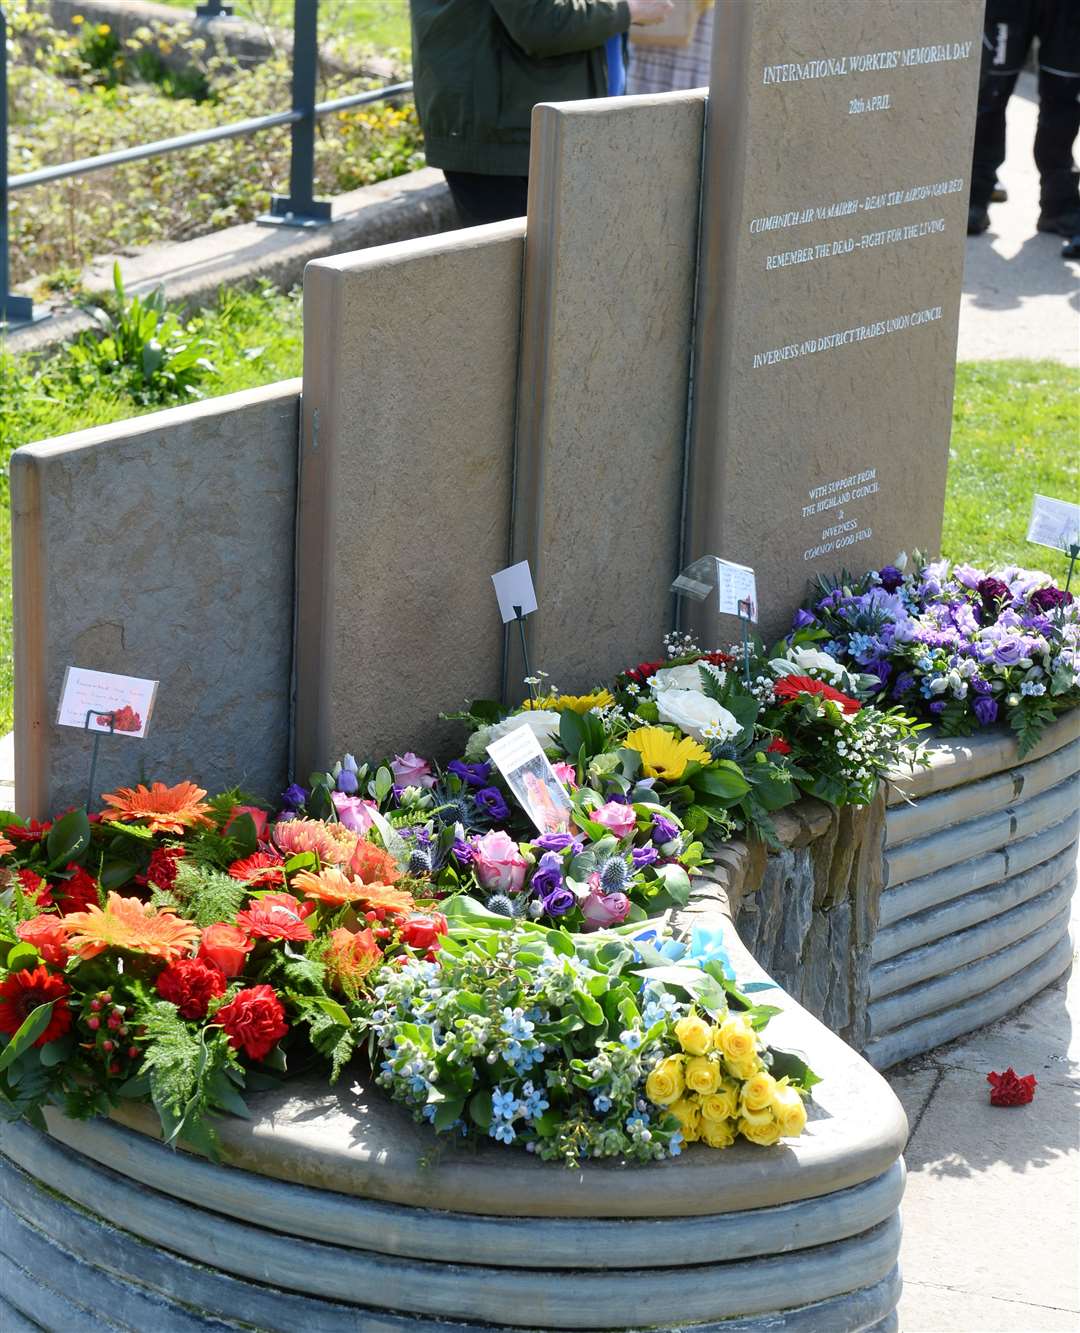 Floral tributes were placed on the memorial on International Workers' Memorial Day last year.